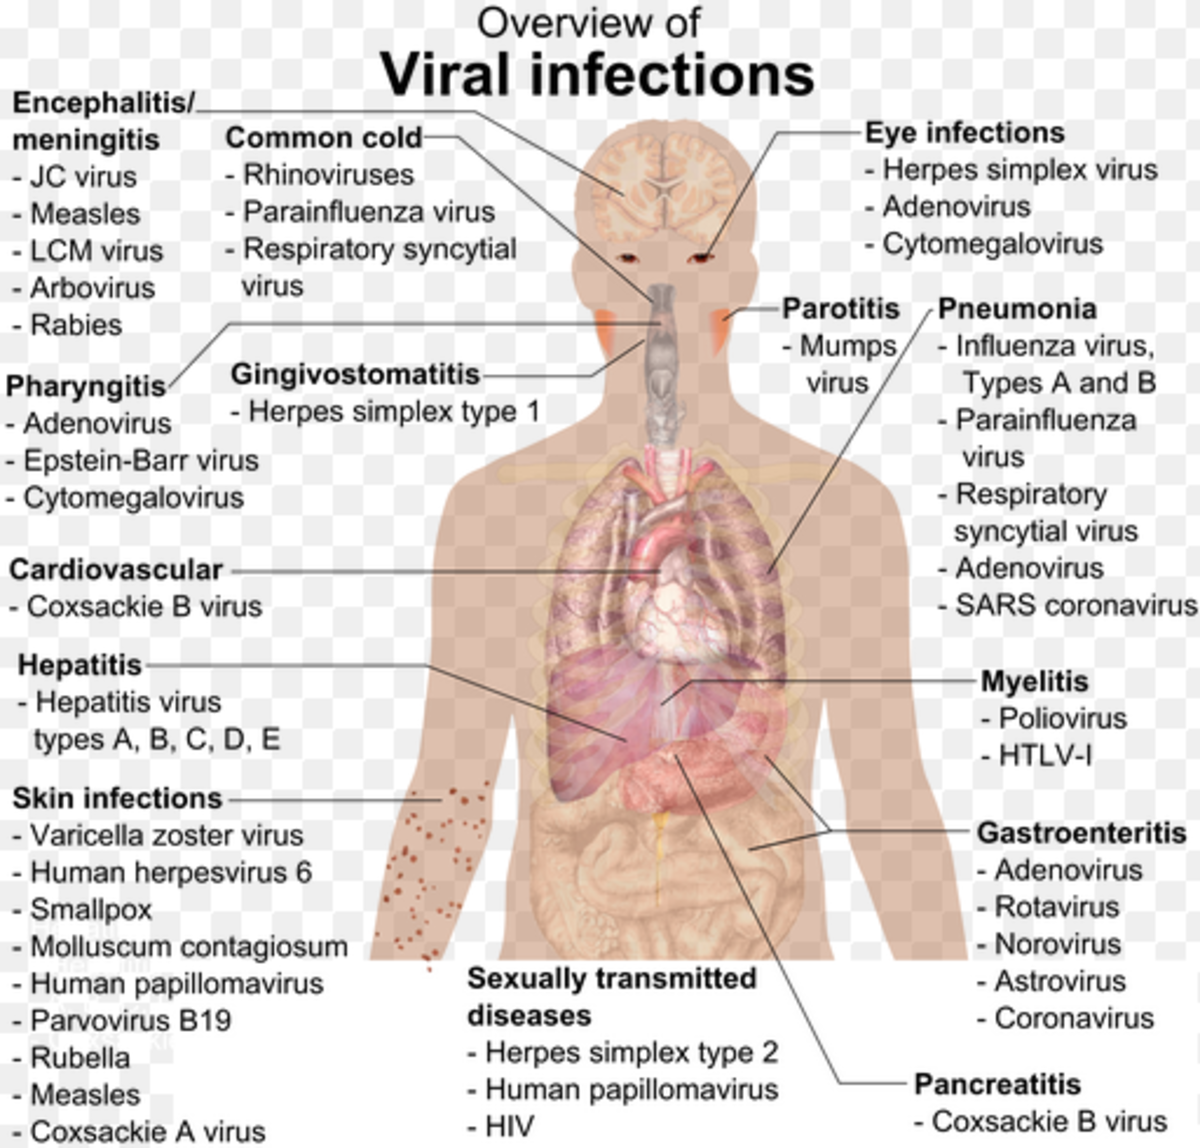 Flus and colds are just a couple types of viral infections.  